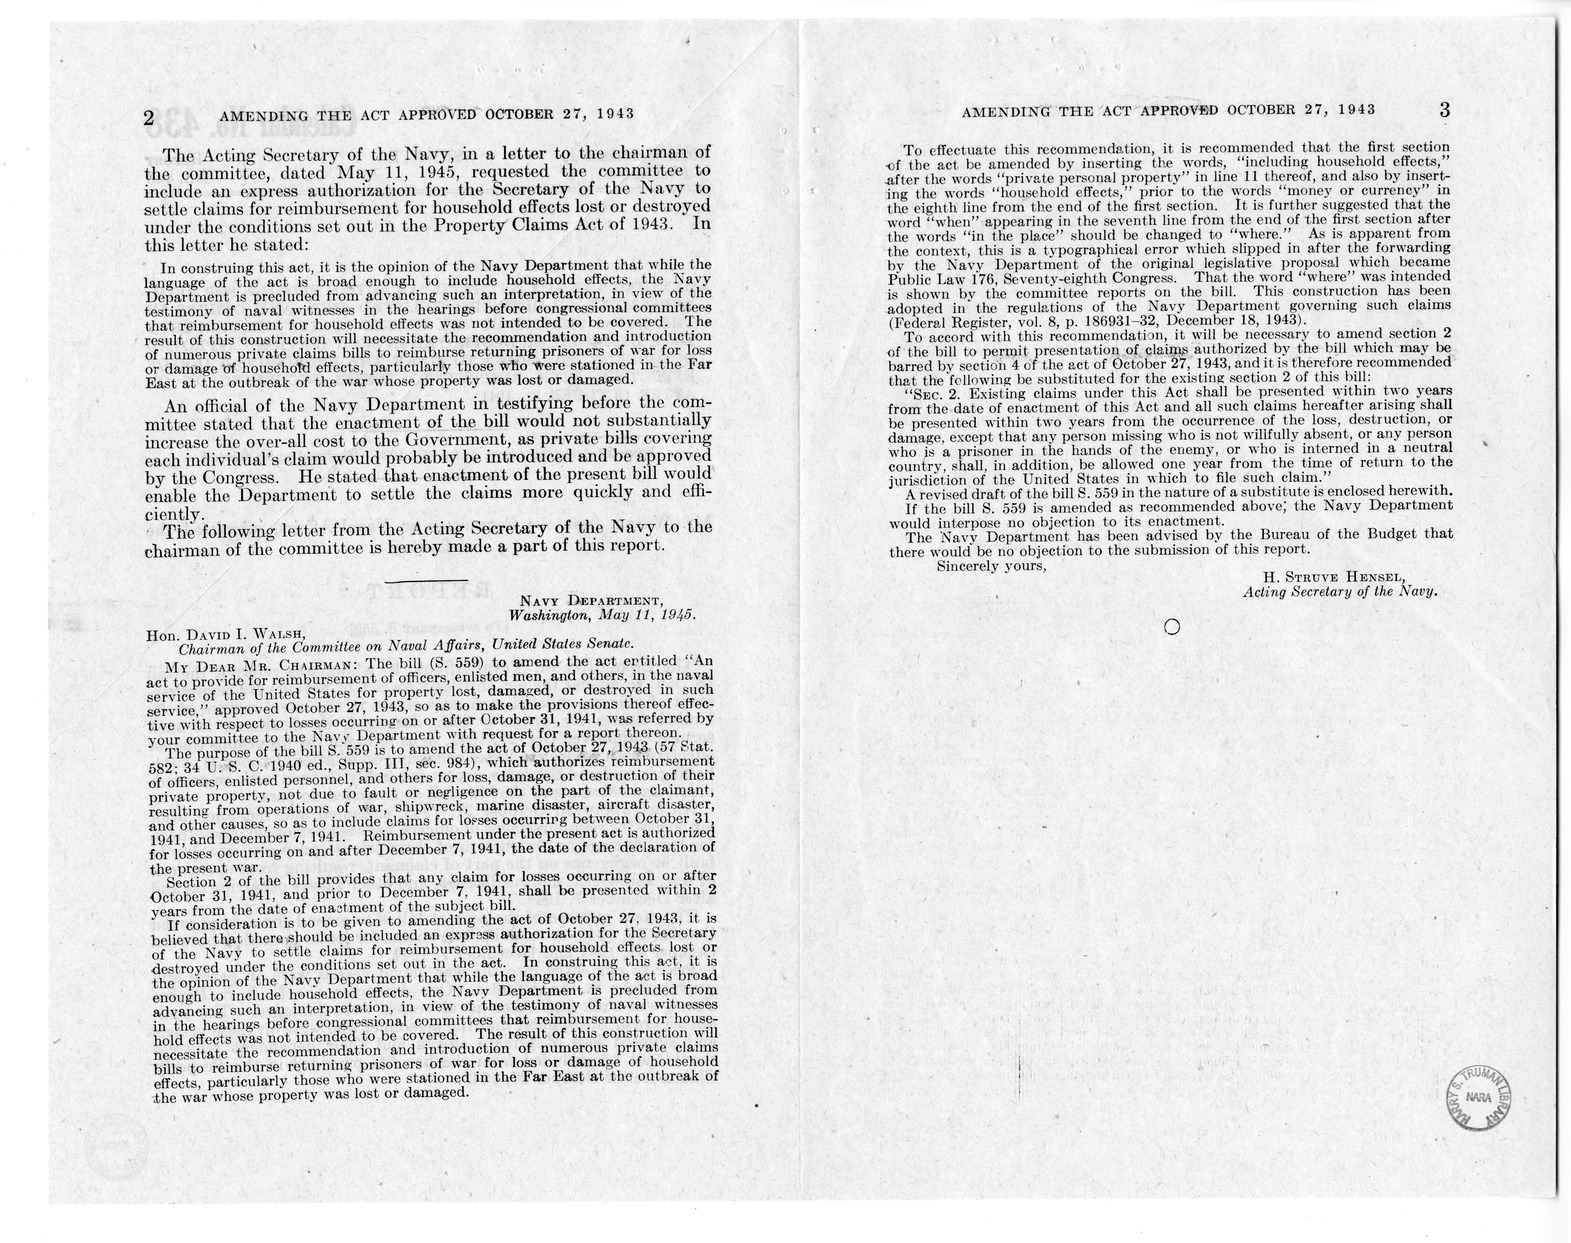 Memorandum from Frederick J. Bailey to M. C. Latta, S. 559, To Amend An Act to Provide for Reimbursement of Officers, Enlisted Men, and Others in the Naval Service of the United States for Property Lost, Damaged, or Destroyed in Such Service, with Attachments